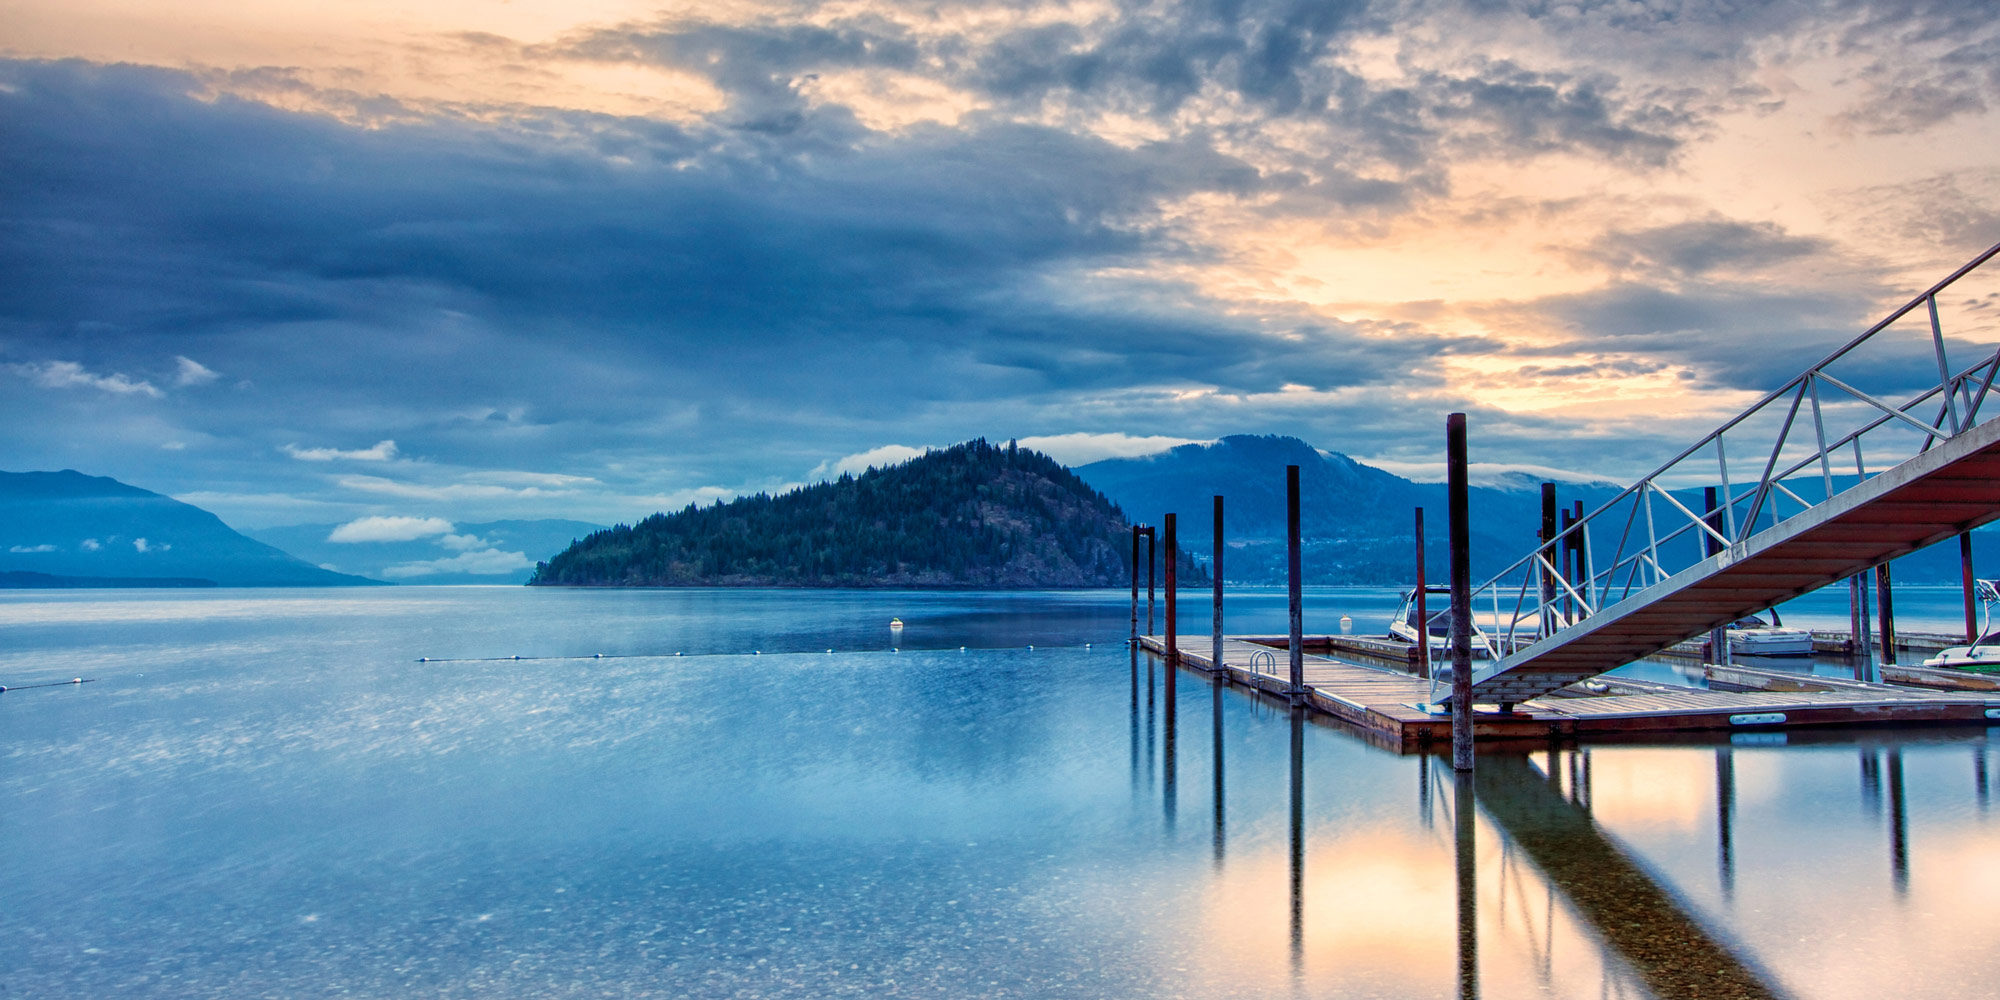 North Shuswap: The North Shuswap region stretches along 100 kms of shoreline from Lee Creek to Seymour Arm and includes the communities of Scotch Creek, Celista, Magna Bay,
Anglemont & St Ives - offering an impressive array of great sights and activities.